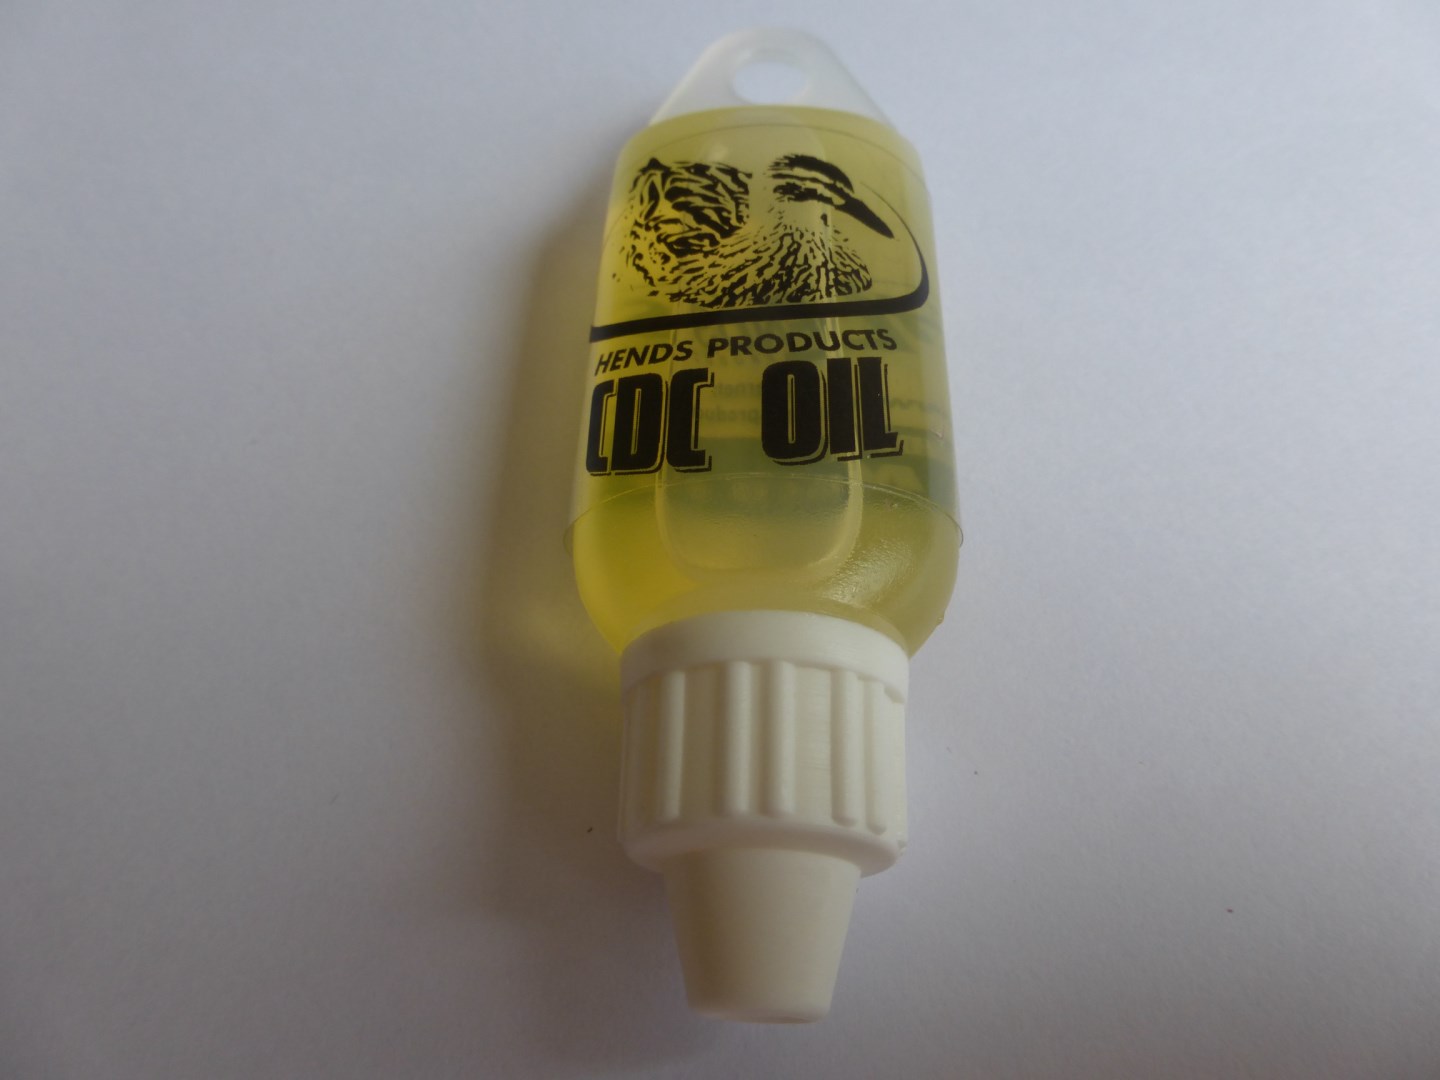 Hends CDC Oil